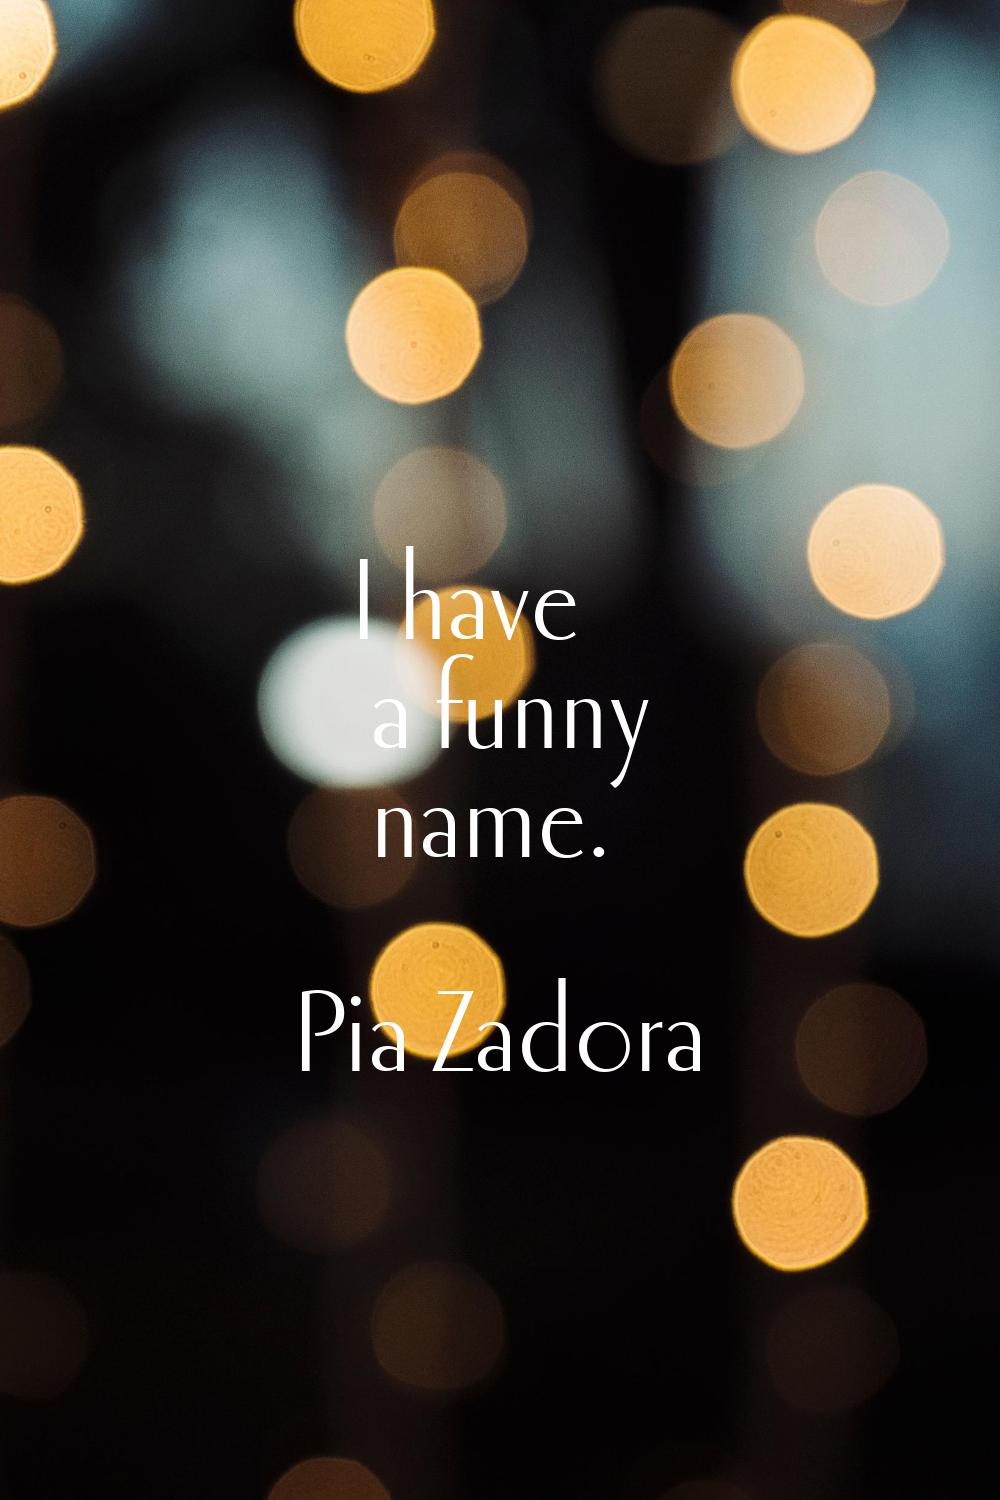 I have a funny name.